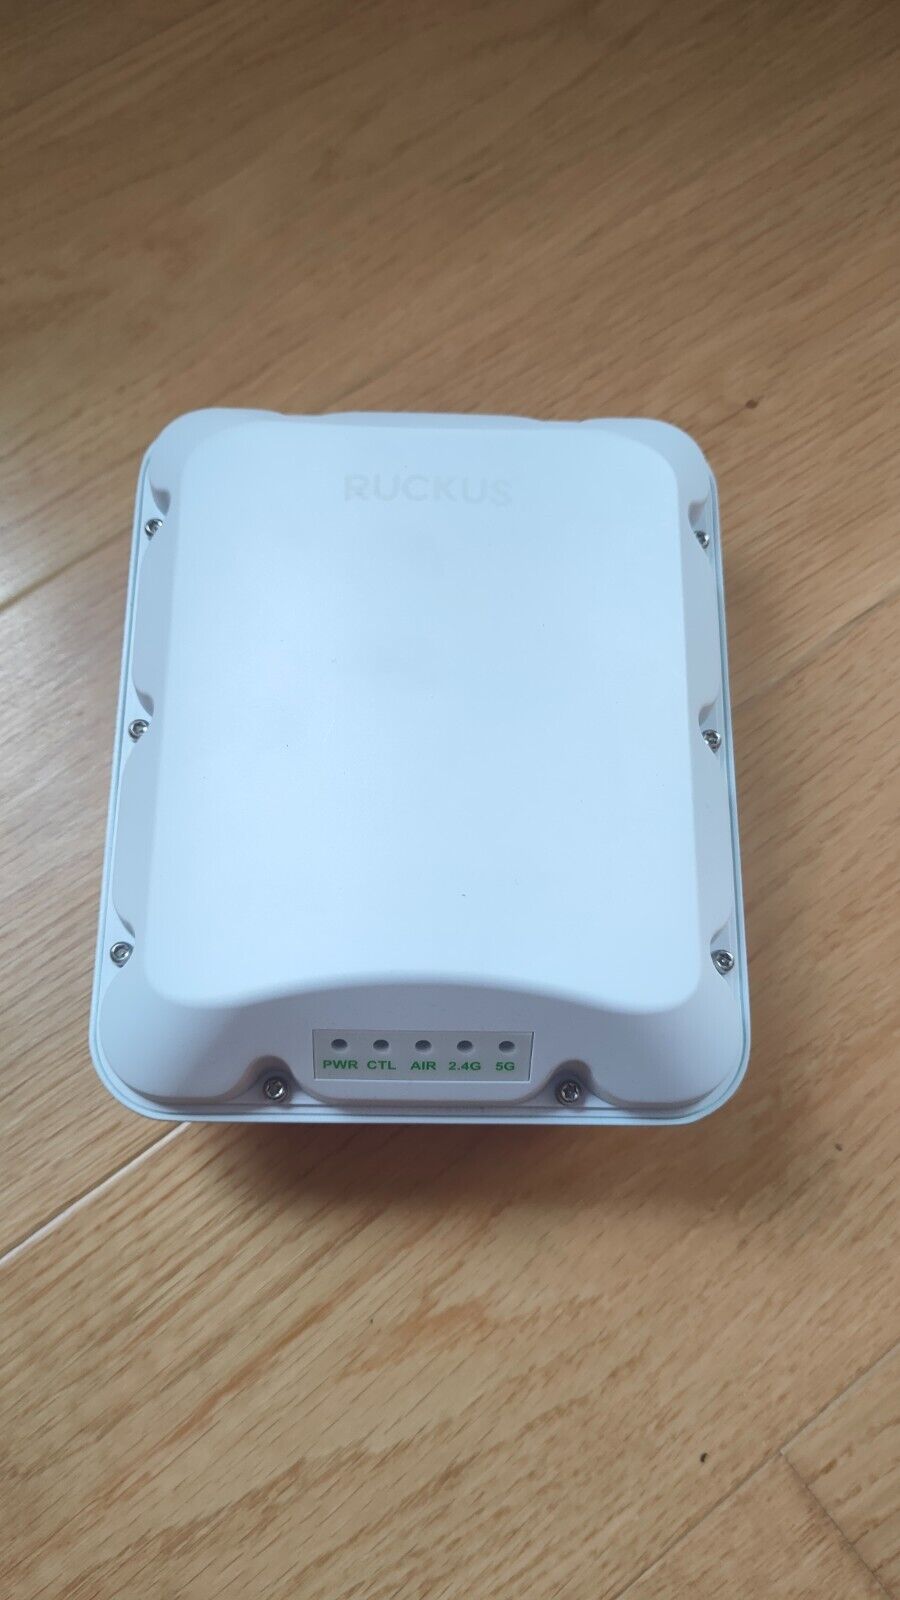 RUCKUS T350c Outdoor Access Point 901-T350-US40 -  BRAND NEW